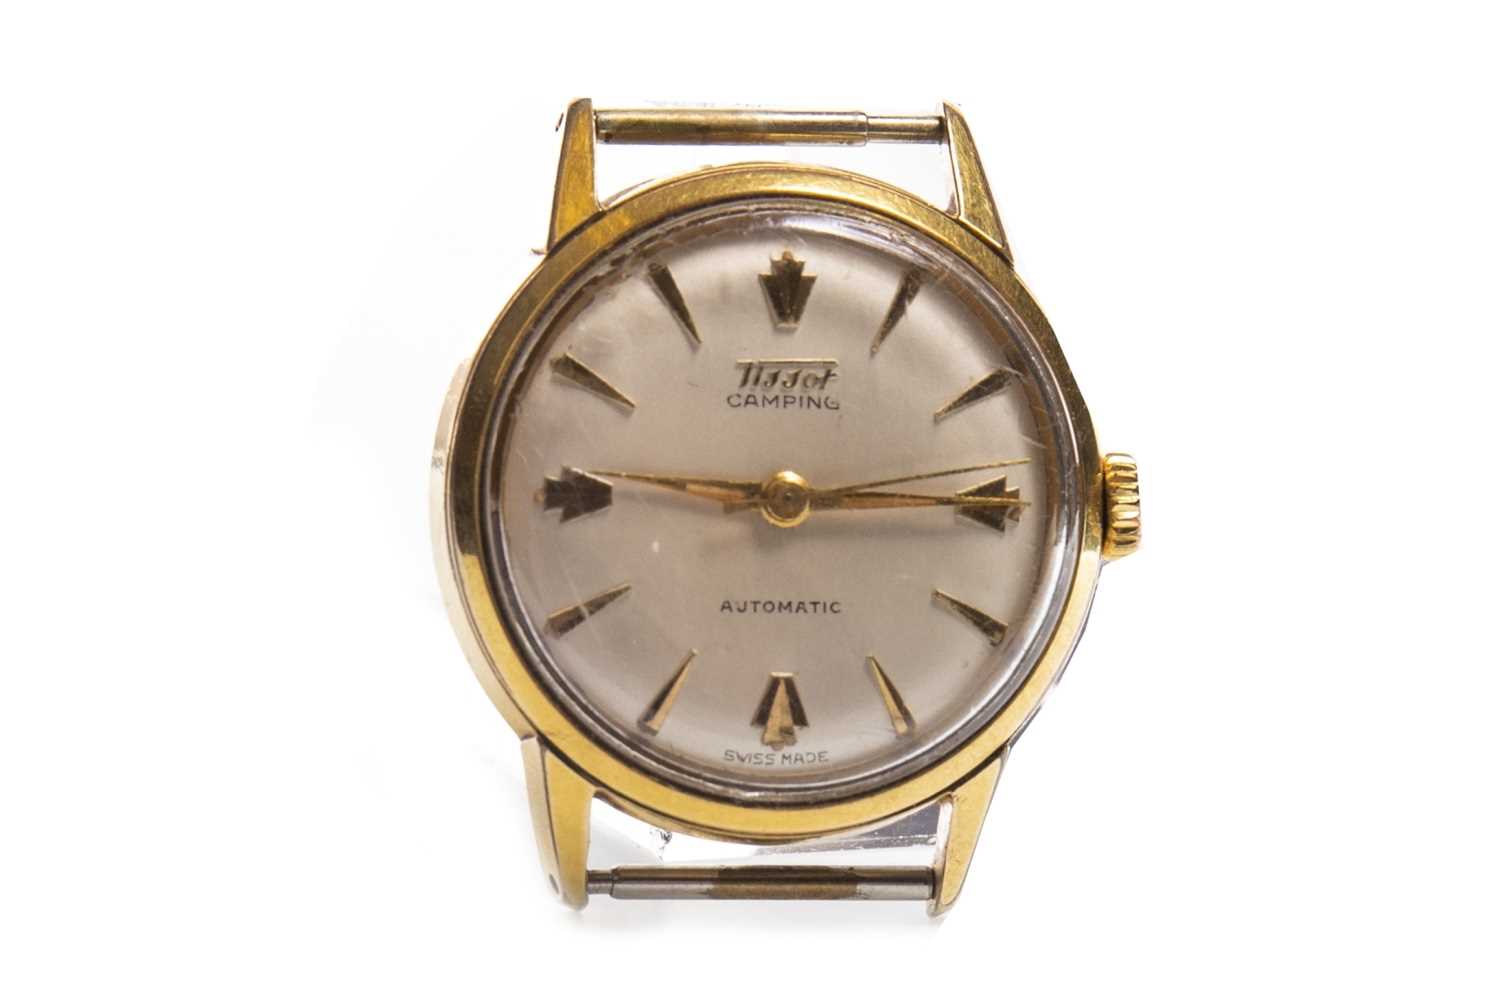 Lot 885 - A GENTLEMAN'S TISSOT CAMPING AUTOMATIC PLATED WATCH